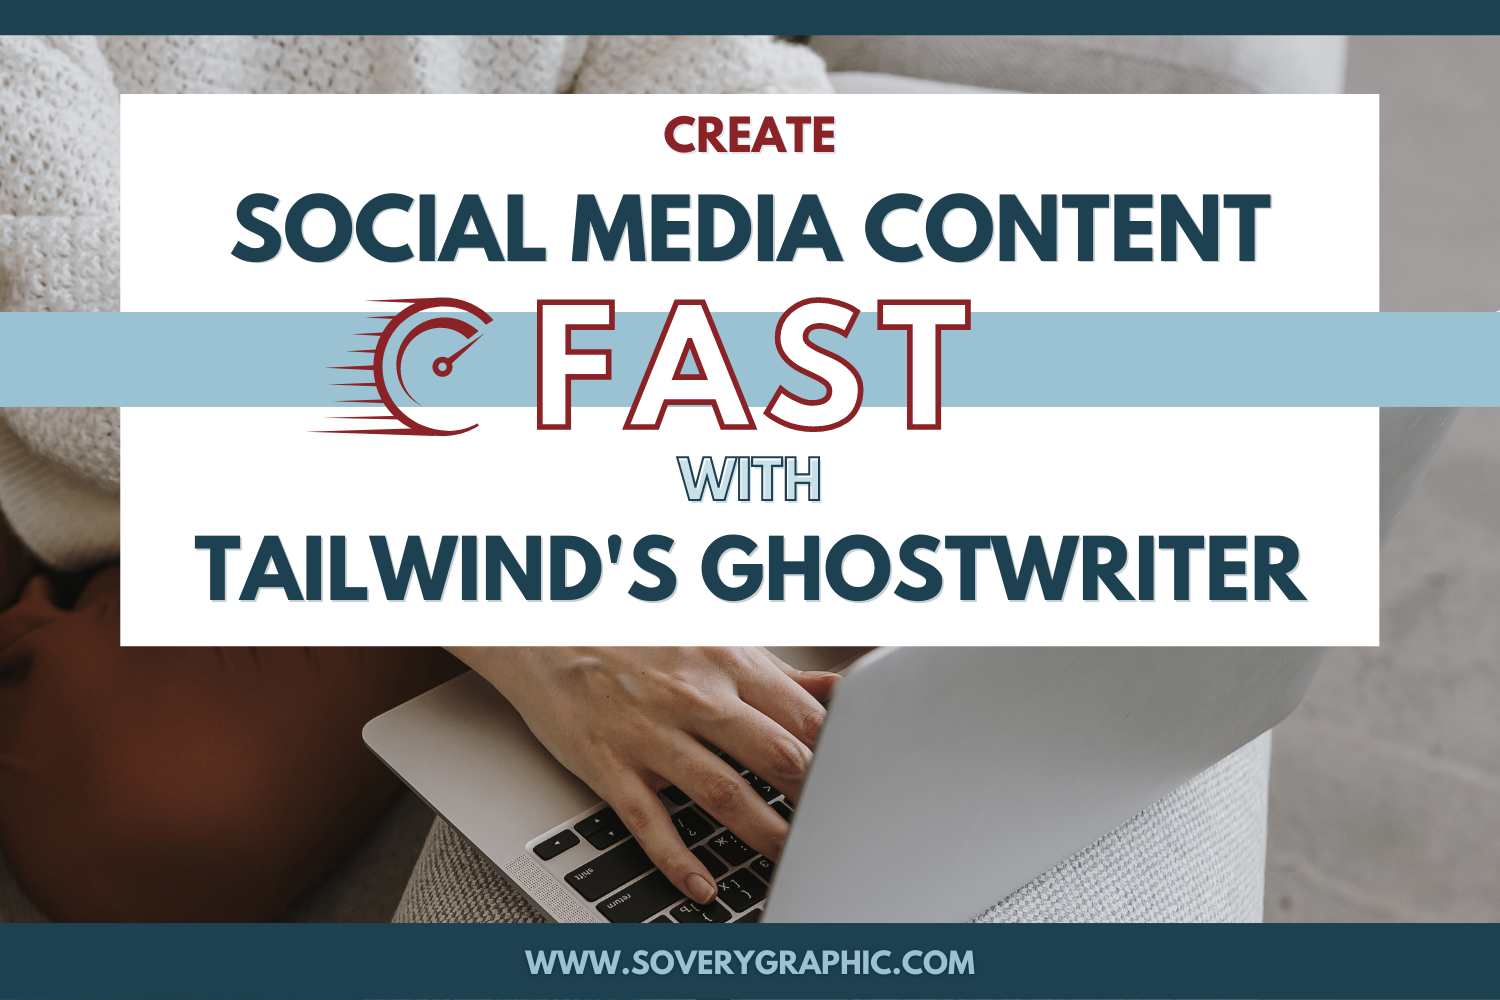 Create Social Media Content FAST with Tailwind's Ghostwriter AI from the So Very Graphic Designs Blog